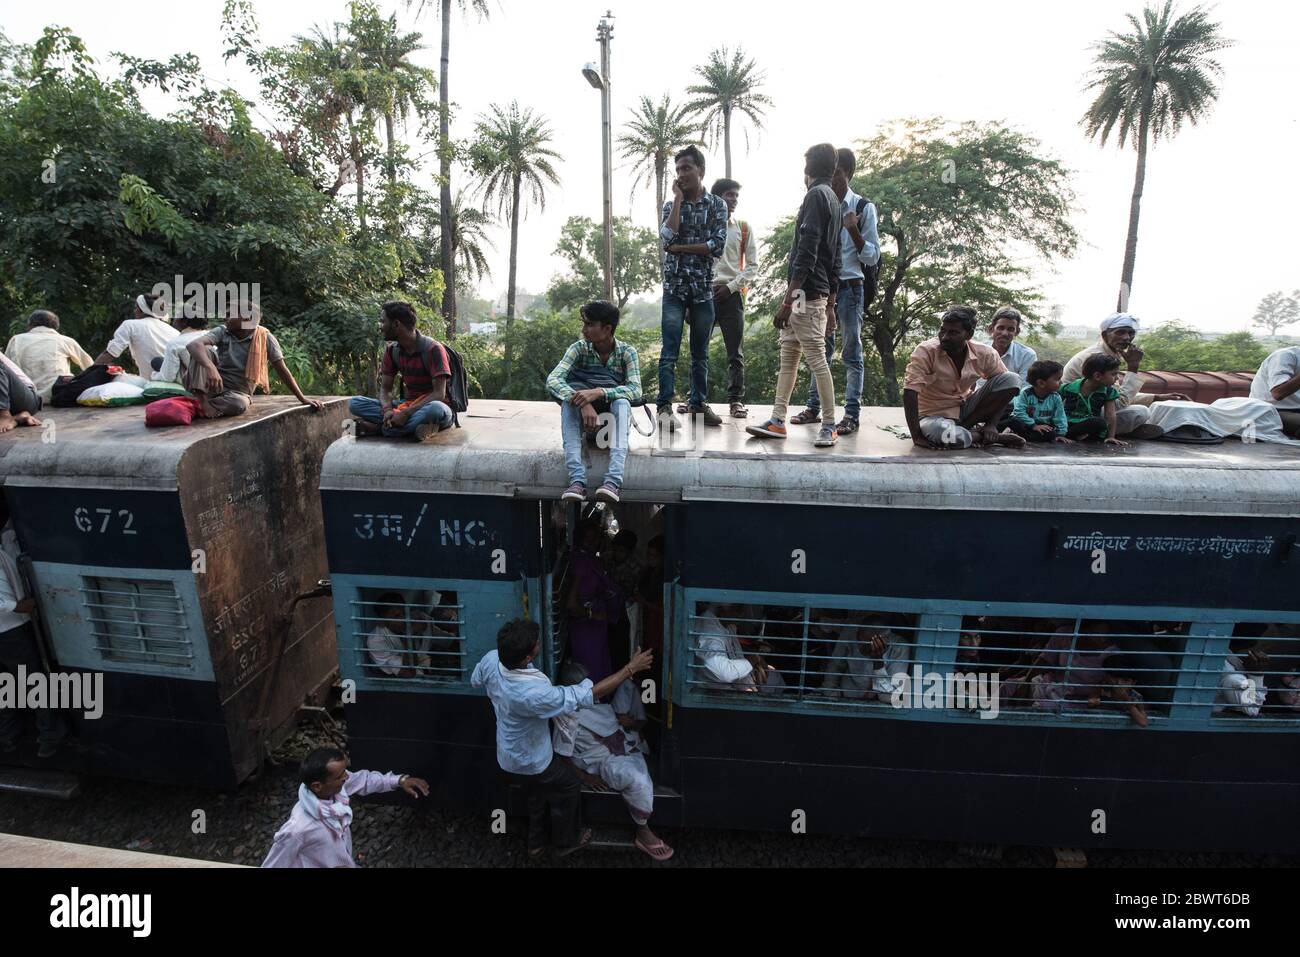 Passengers on top of overcrowded train at a train station in rural Madhya Pradesh, India. Indian Railways. Stock Photo